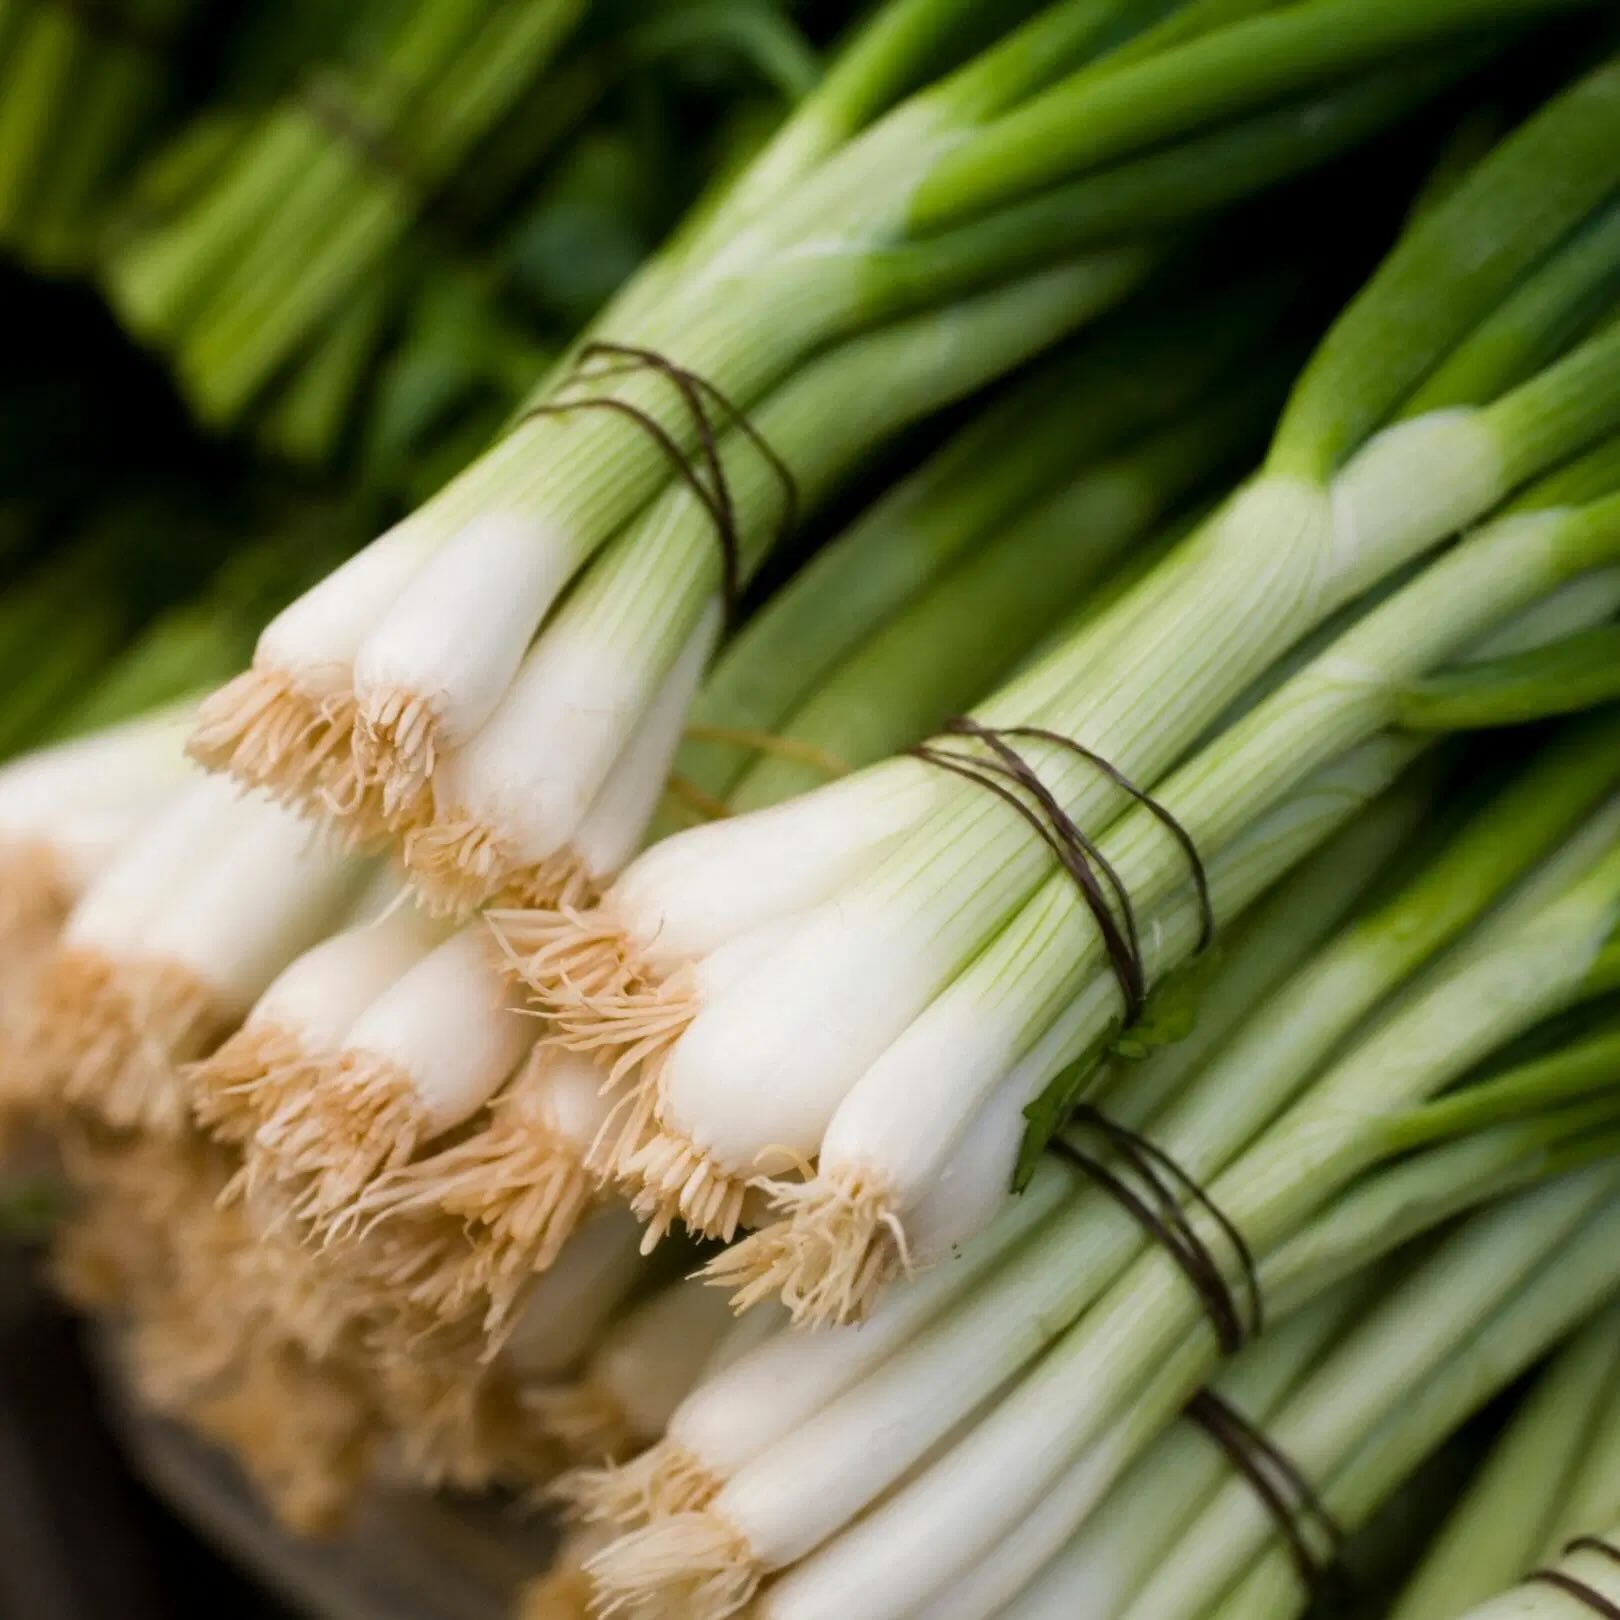 How To Store Spring Onions In Fridge